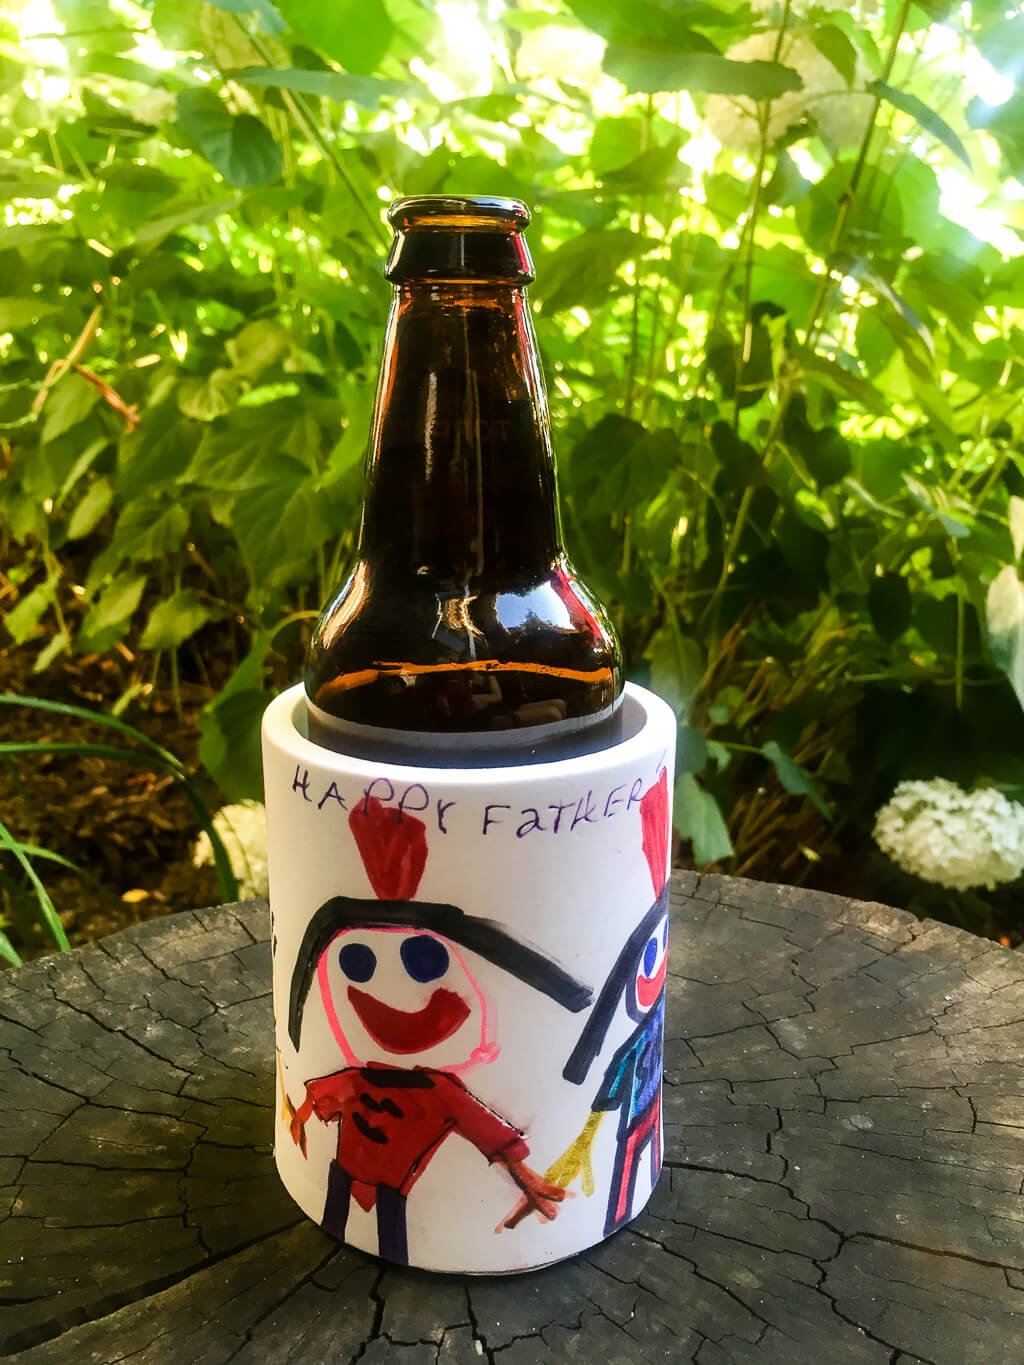 https://www.merrimentdesign.com/images/diy-drink-coozie-cool-bottles-cans-fathers-day-gift_1.jpg